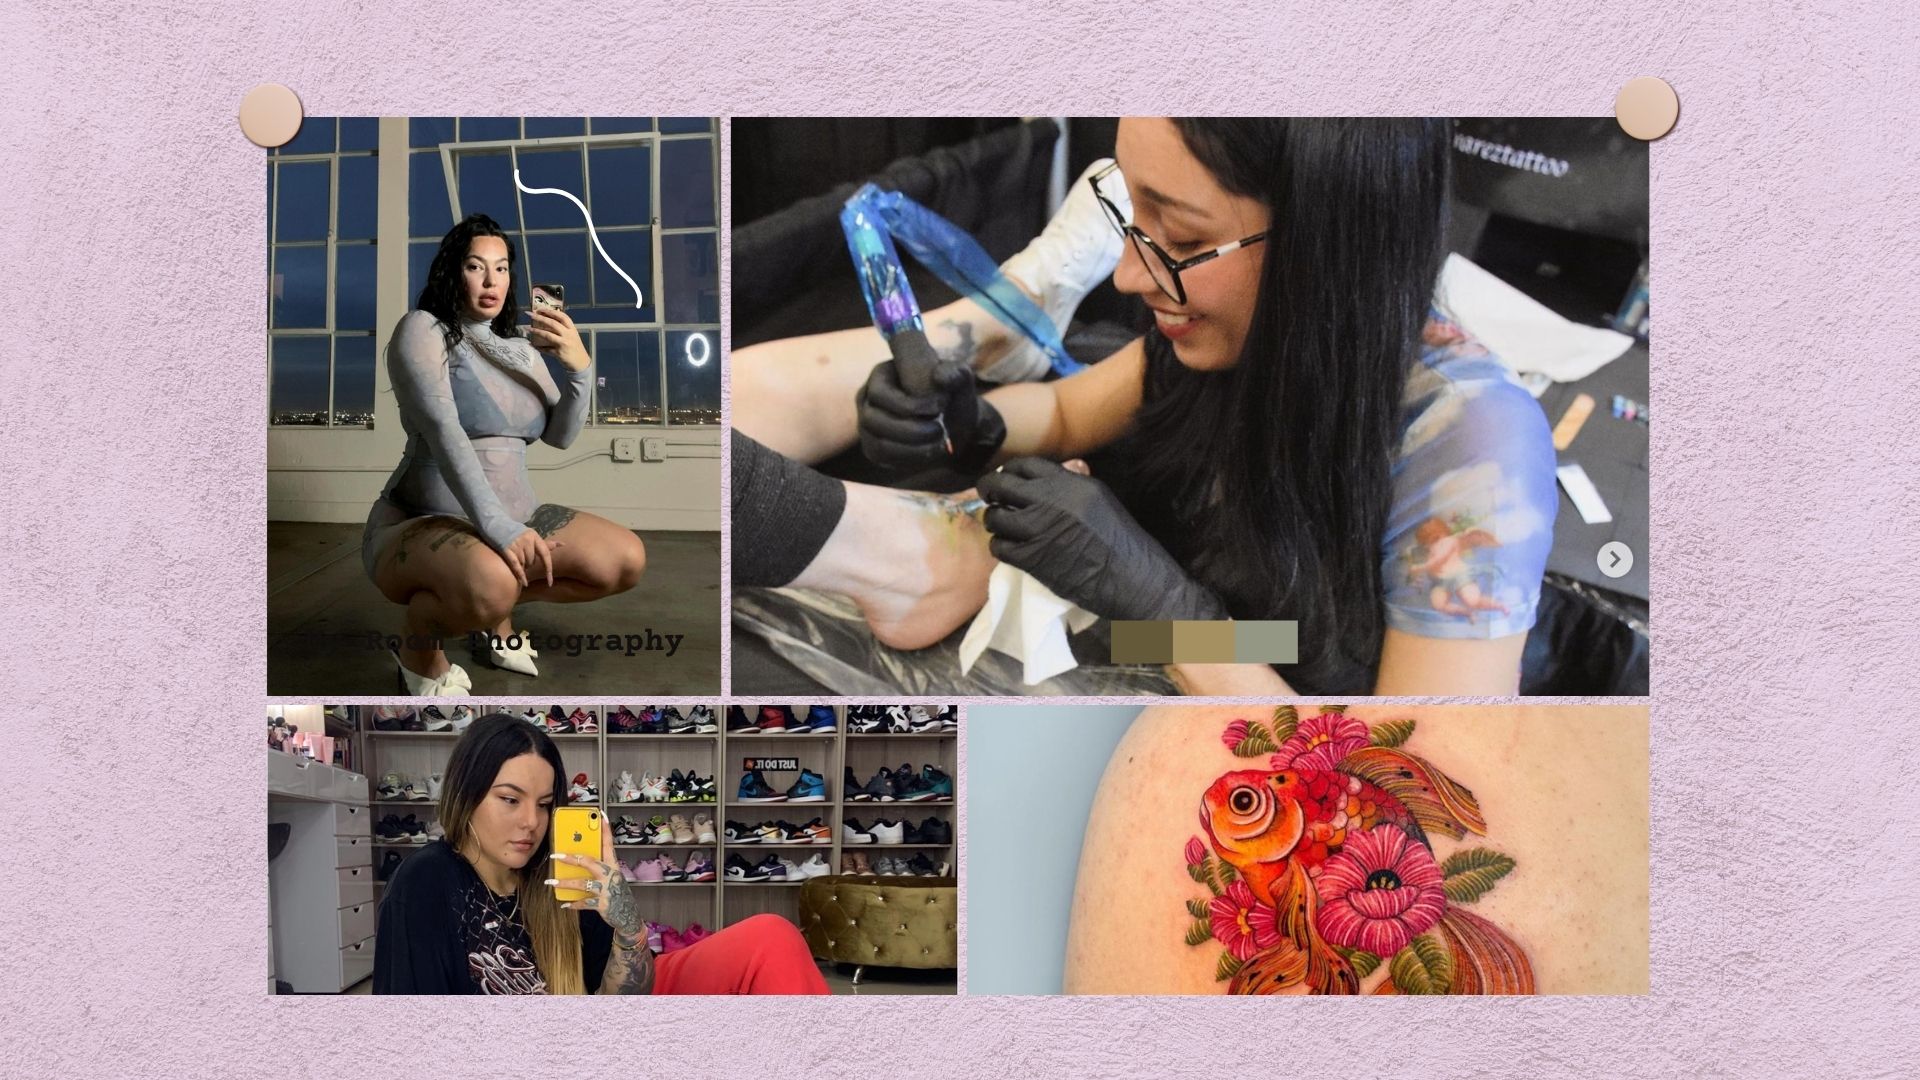 Amazing Latina Tattoo Artists That Should Be on Your Radar